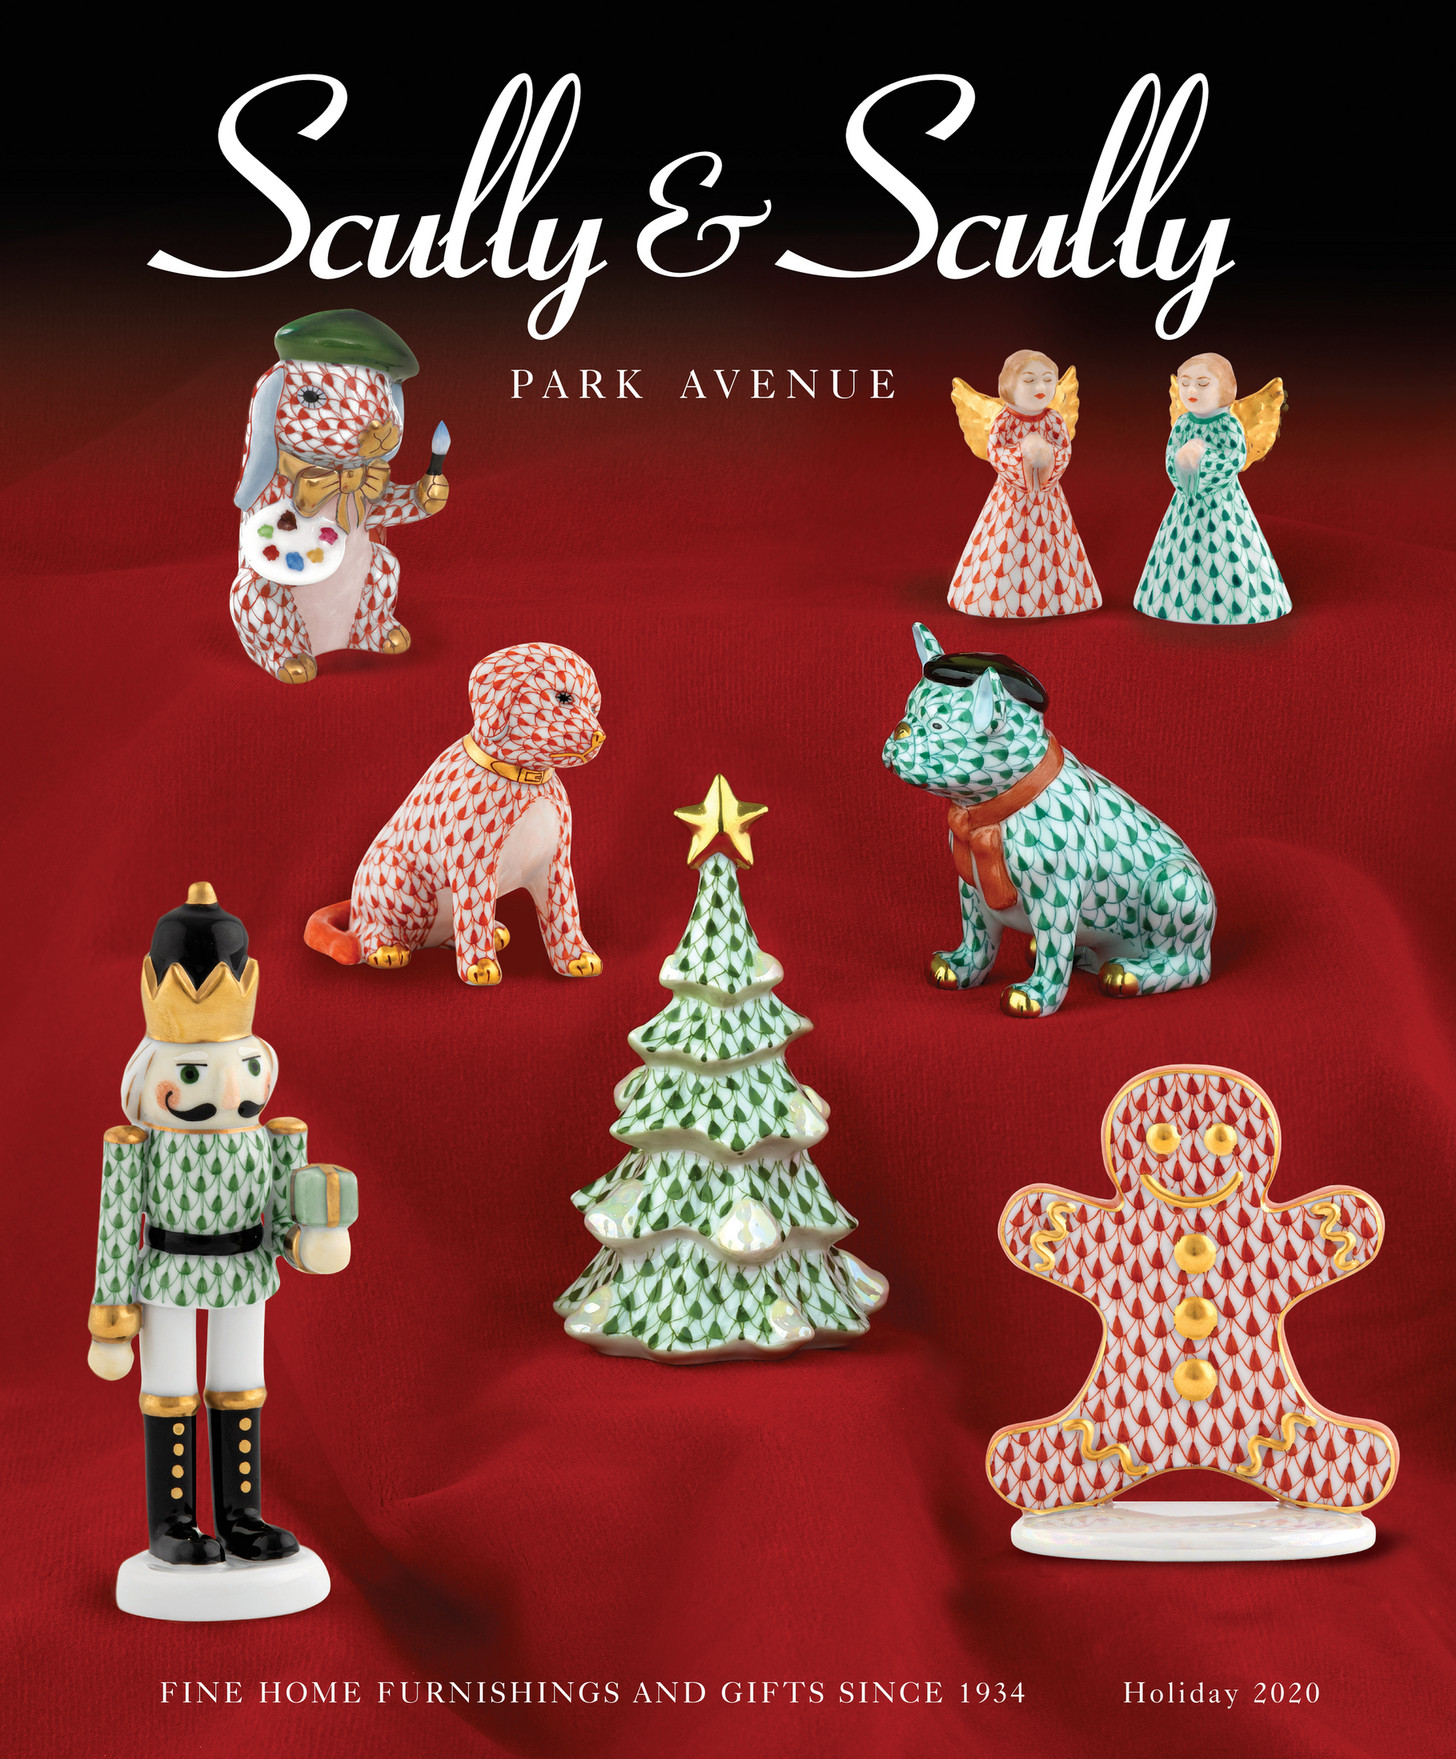 Scully & Scully Fall Catalogue 2020 Page 1 Created with